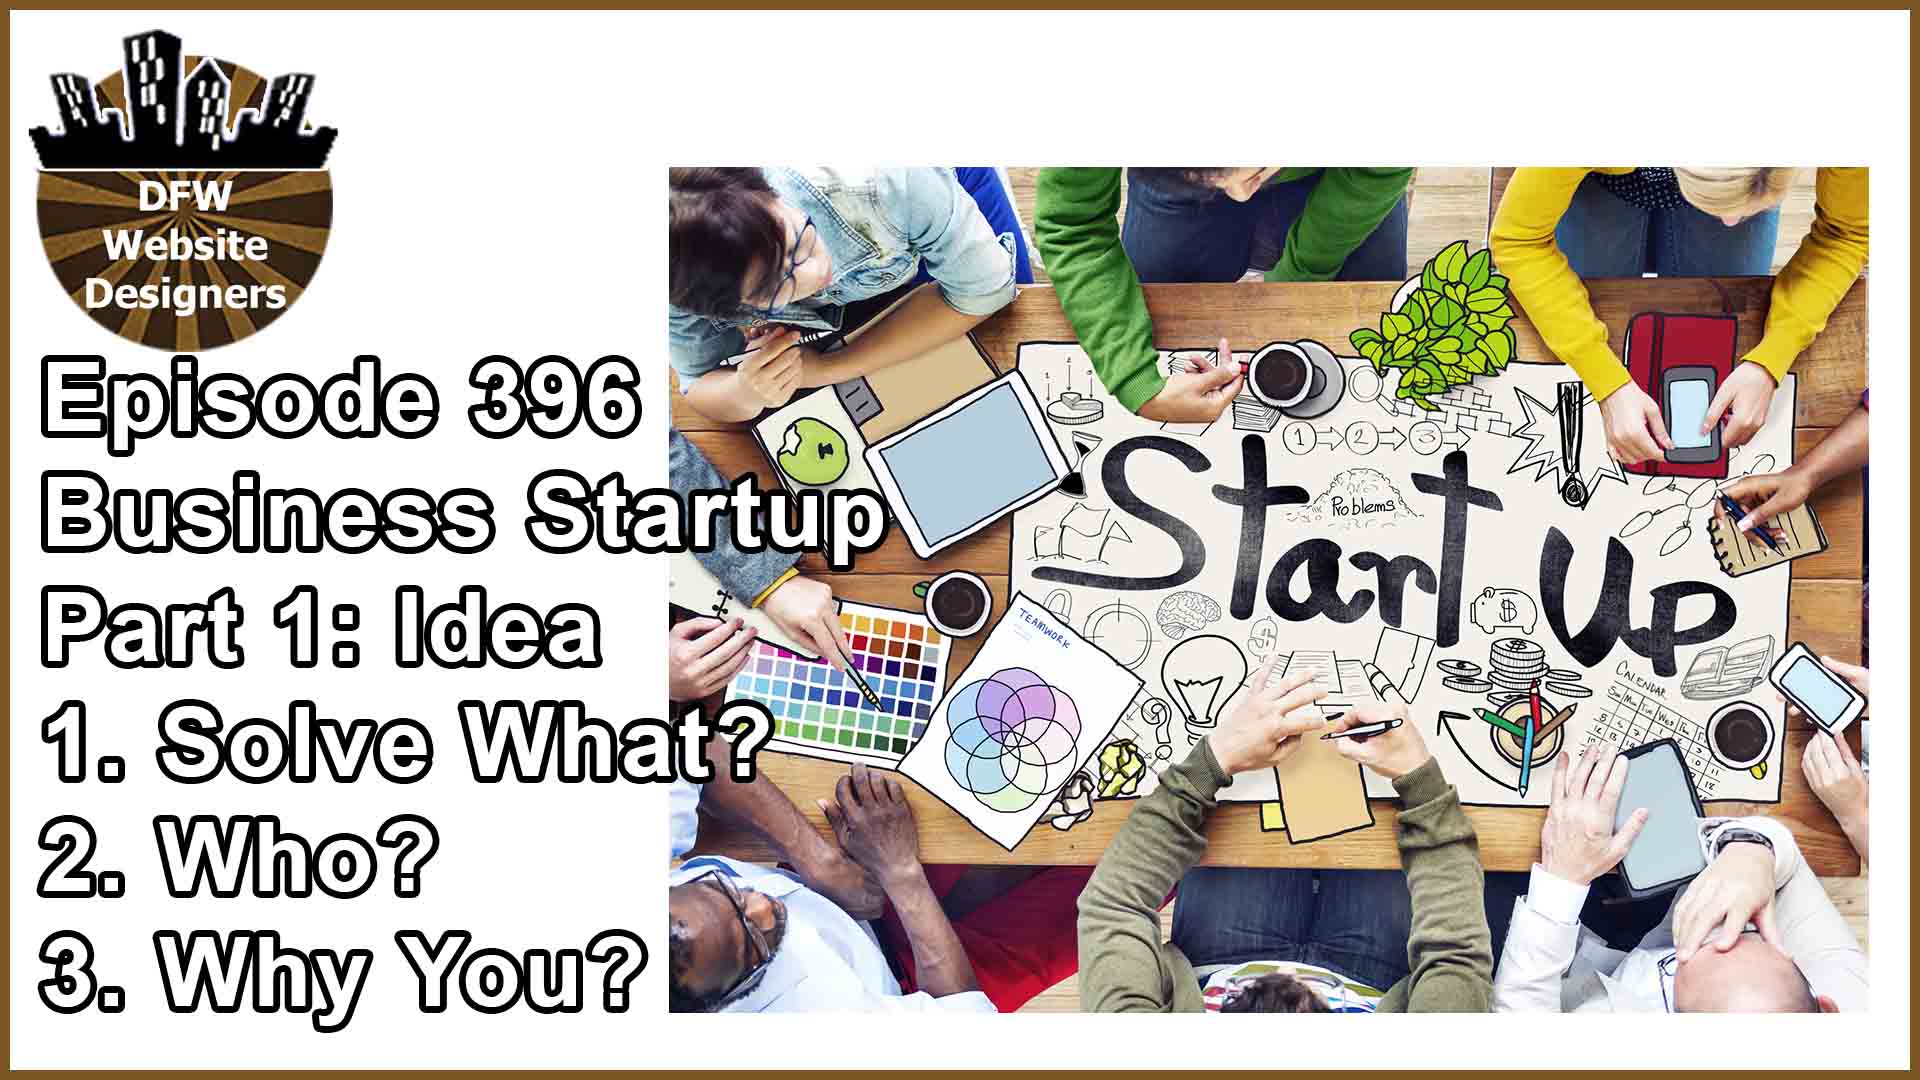 Episode 396 Startup Business Pt1 Idea: Solves What? Who? Why You?